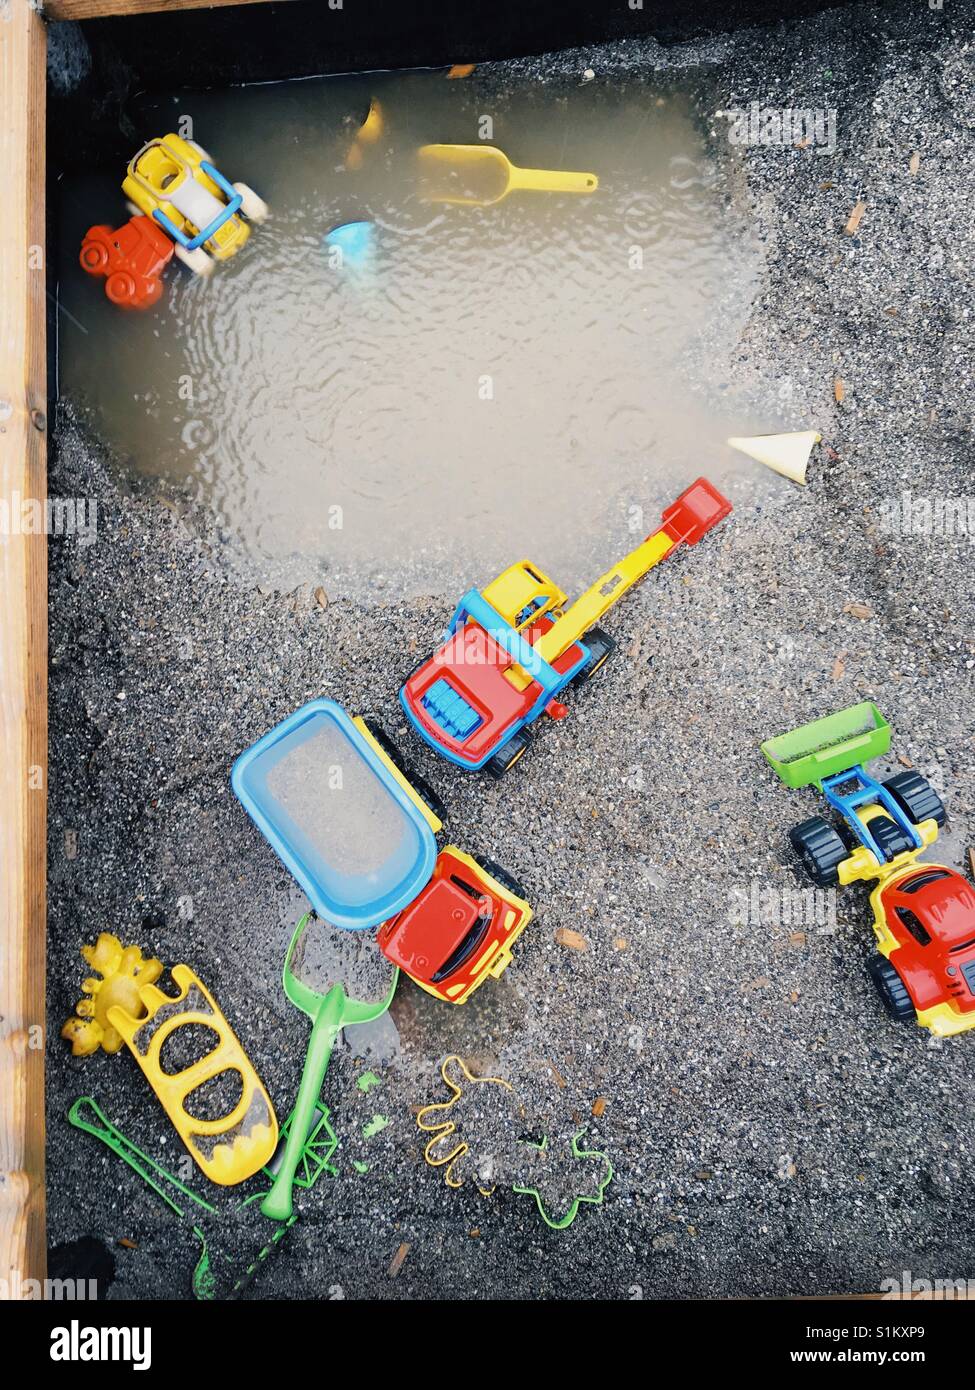 Lonely toys in the sand during a rainfall Stock Photo